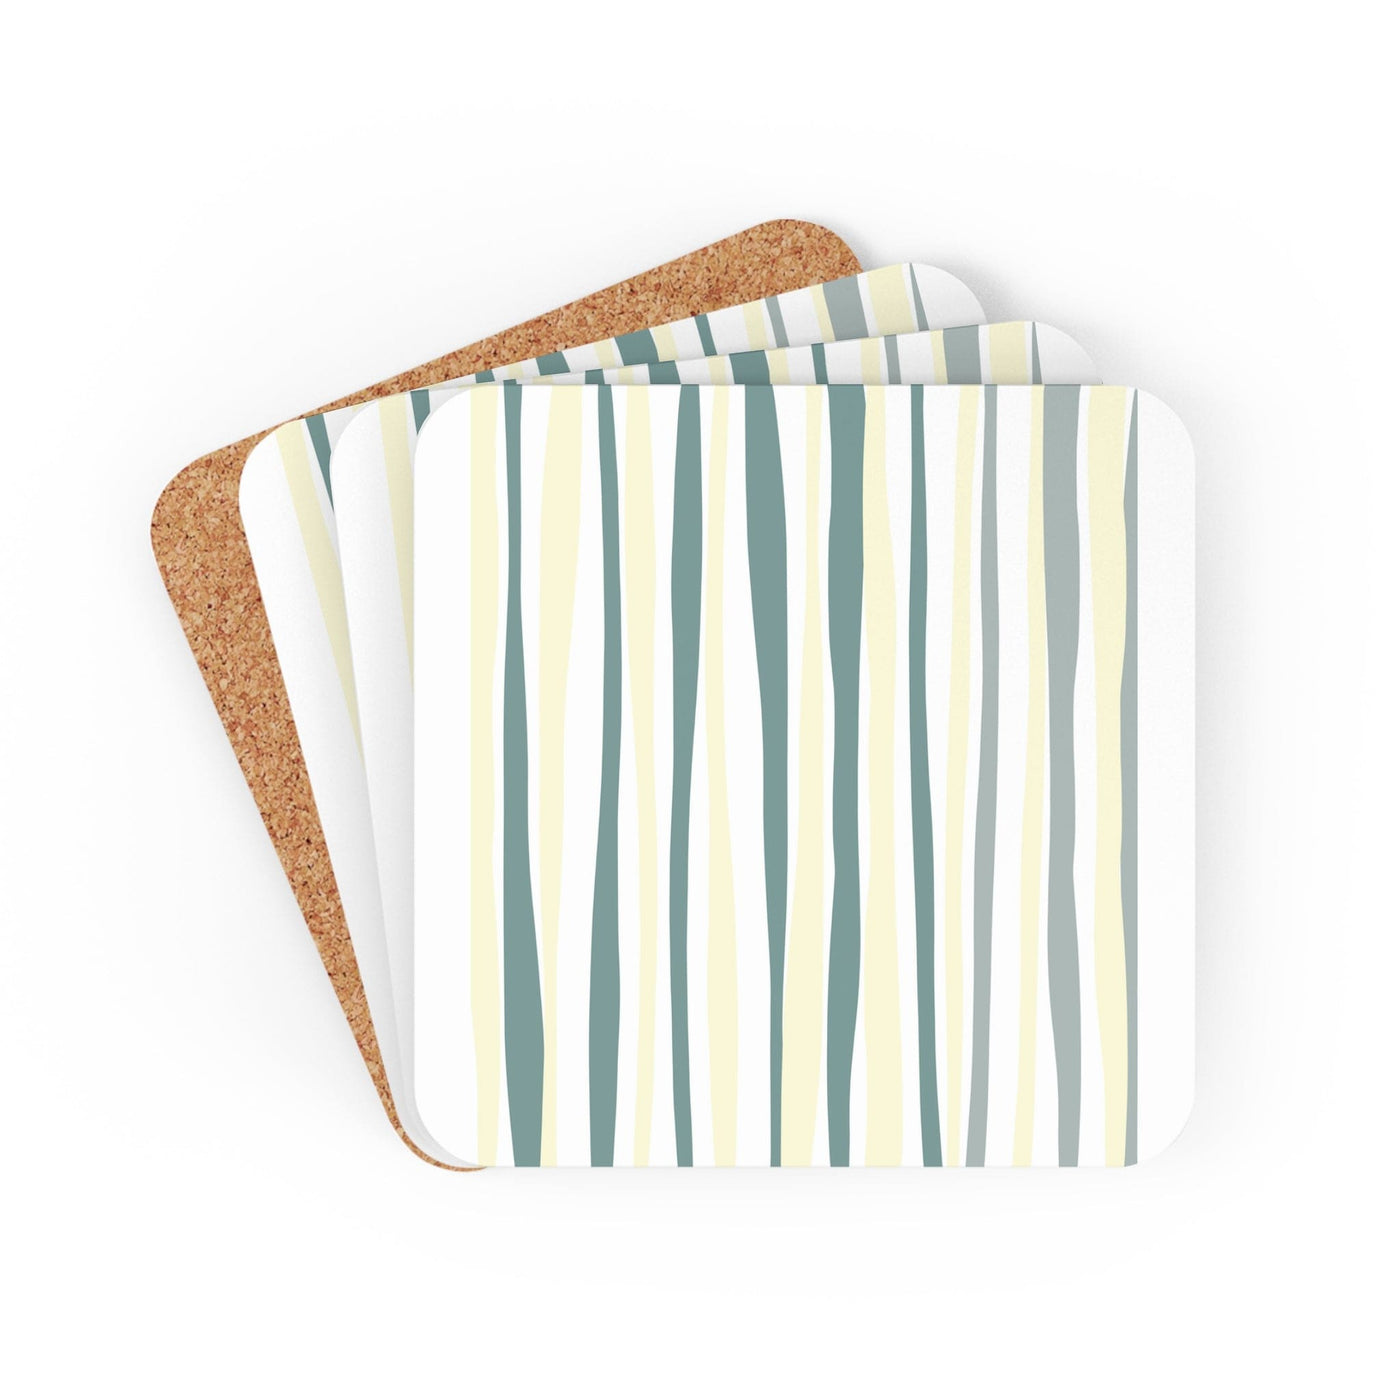 Coaster Set Of 4 For Drinks Yellow And Mint Stripe Abstract Art - Decorative